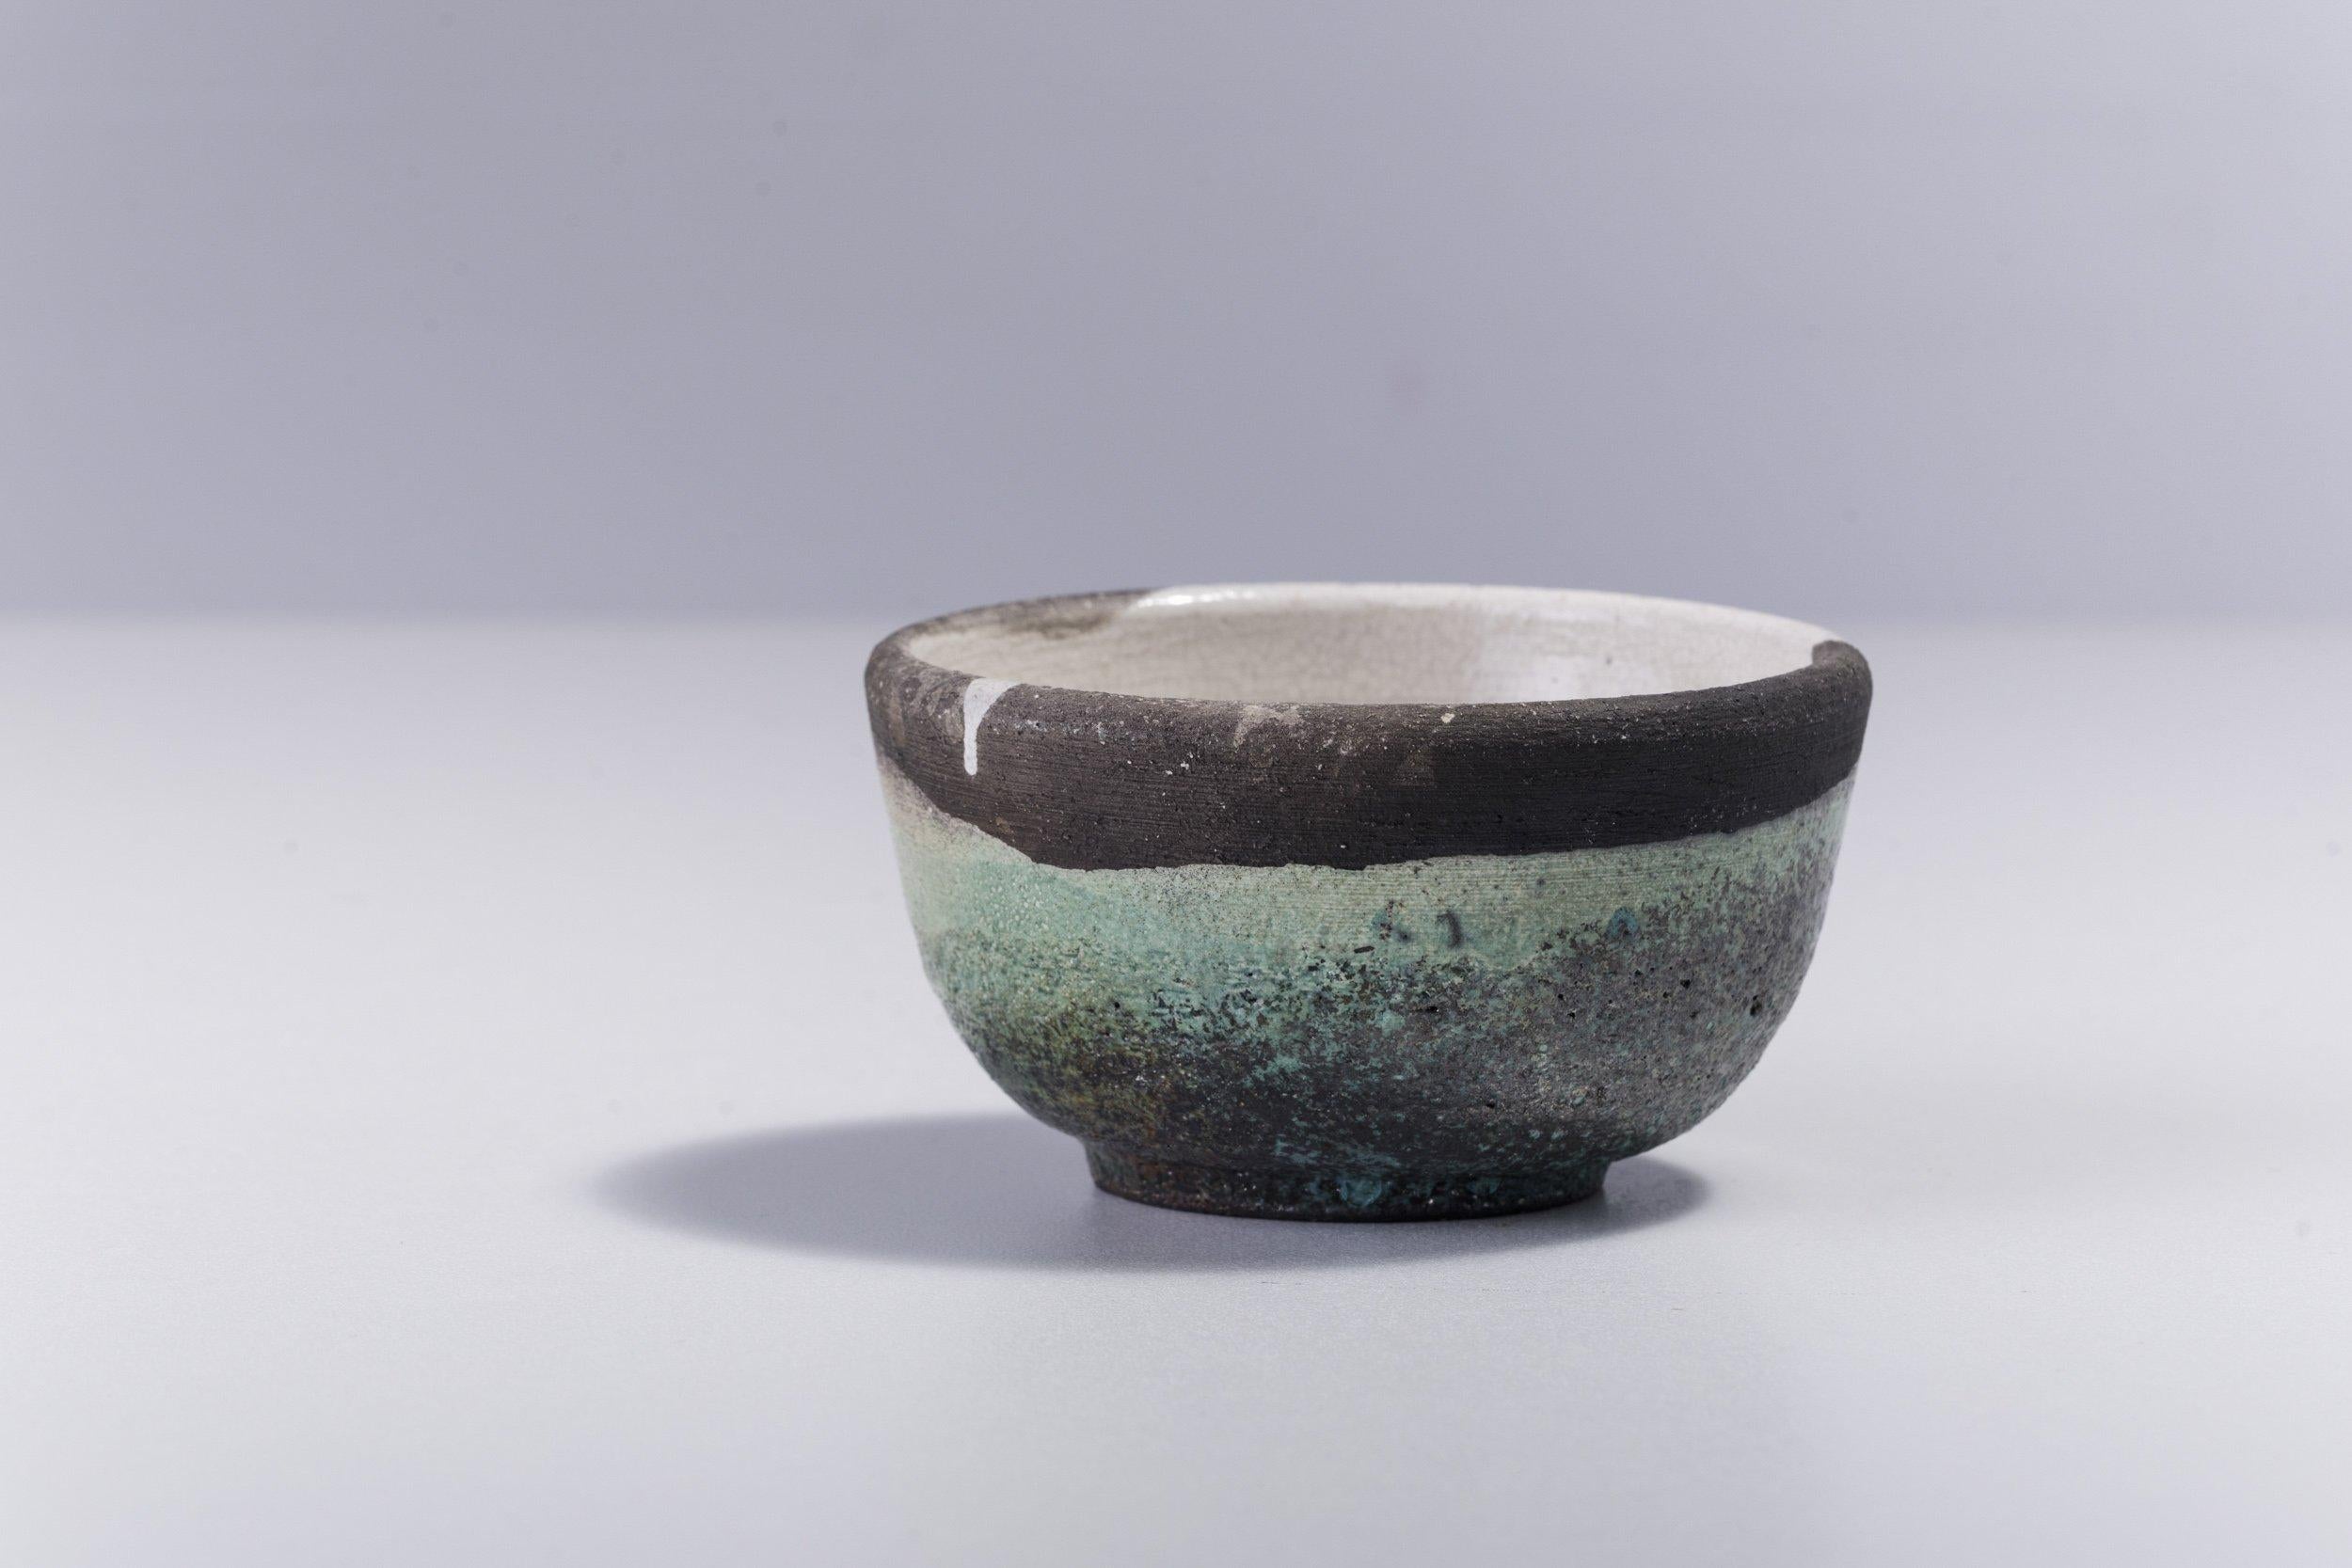 Japanese LAAB Cloud Tea Cups Raku Ceramic Natural Green Gold In Excellent Condition For Sale In monza, Monza and Brianza